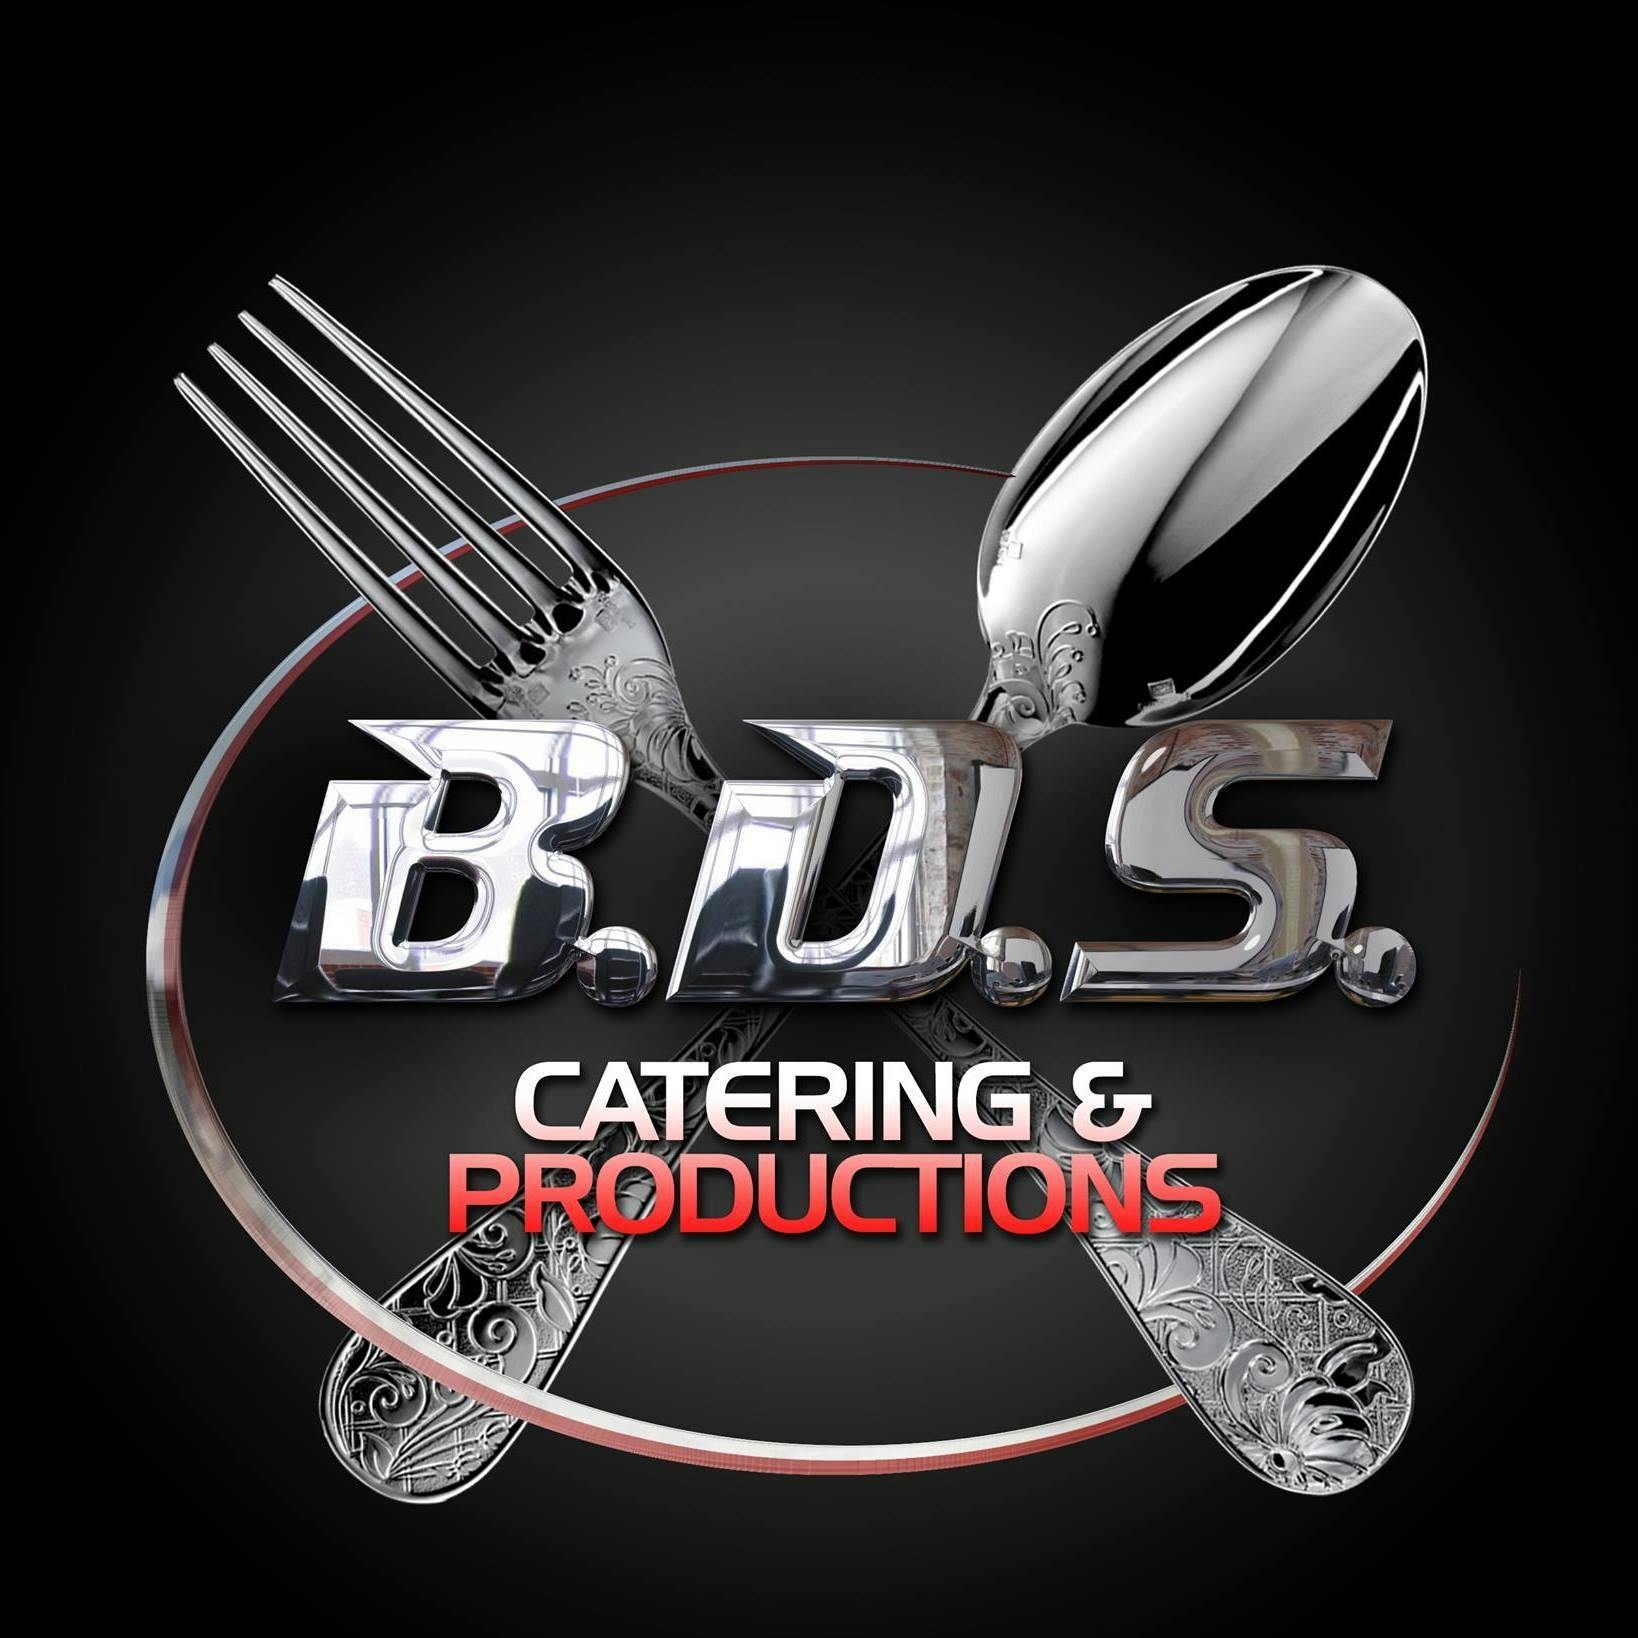 B.D.S. Catering & Productions